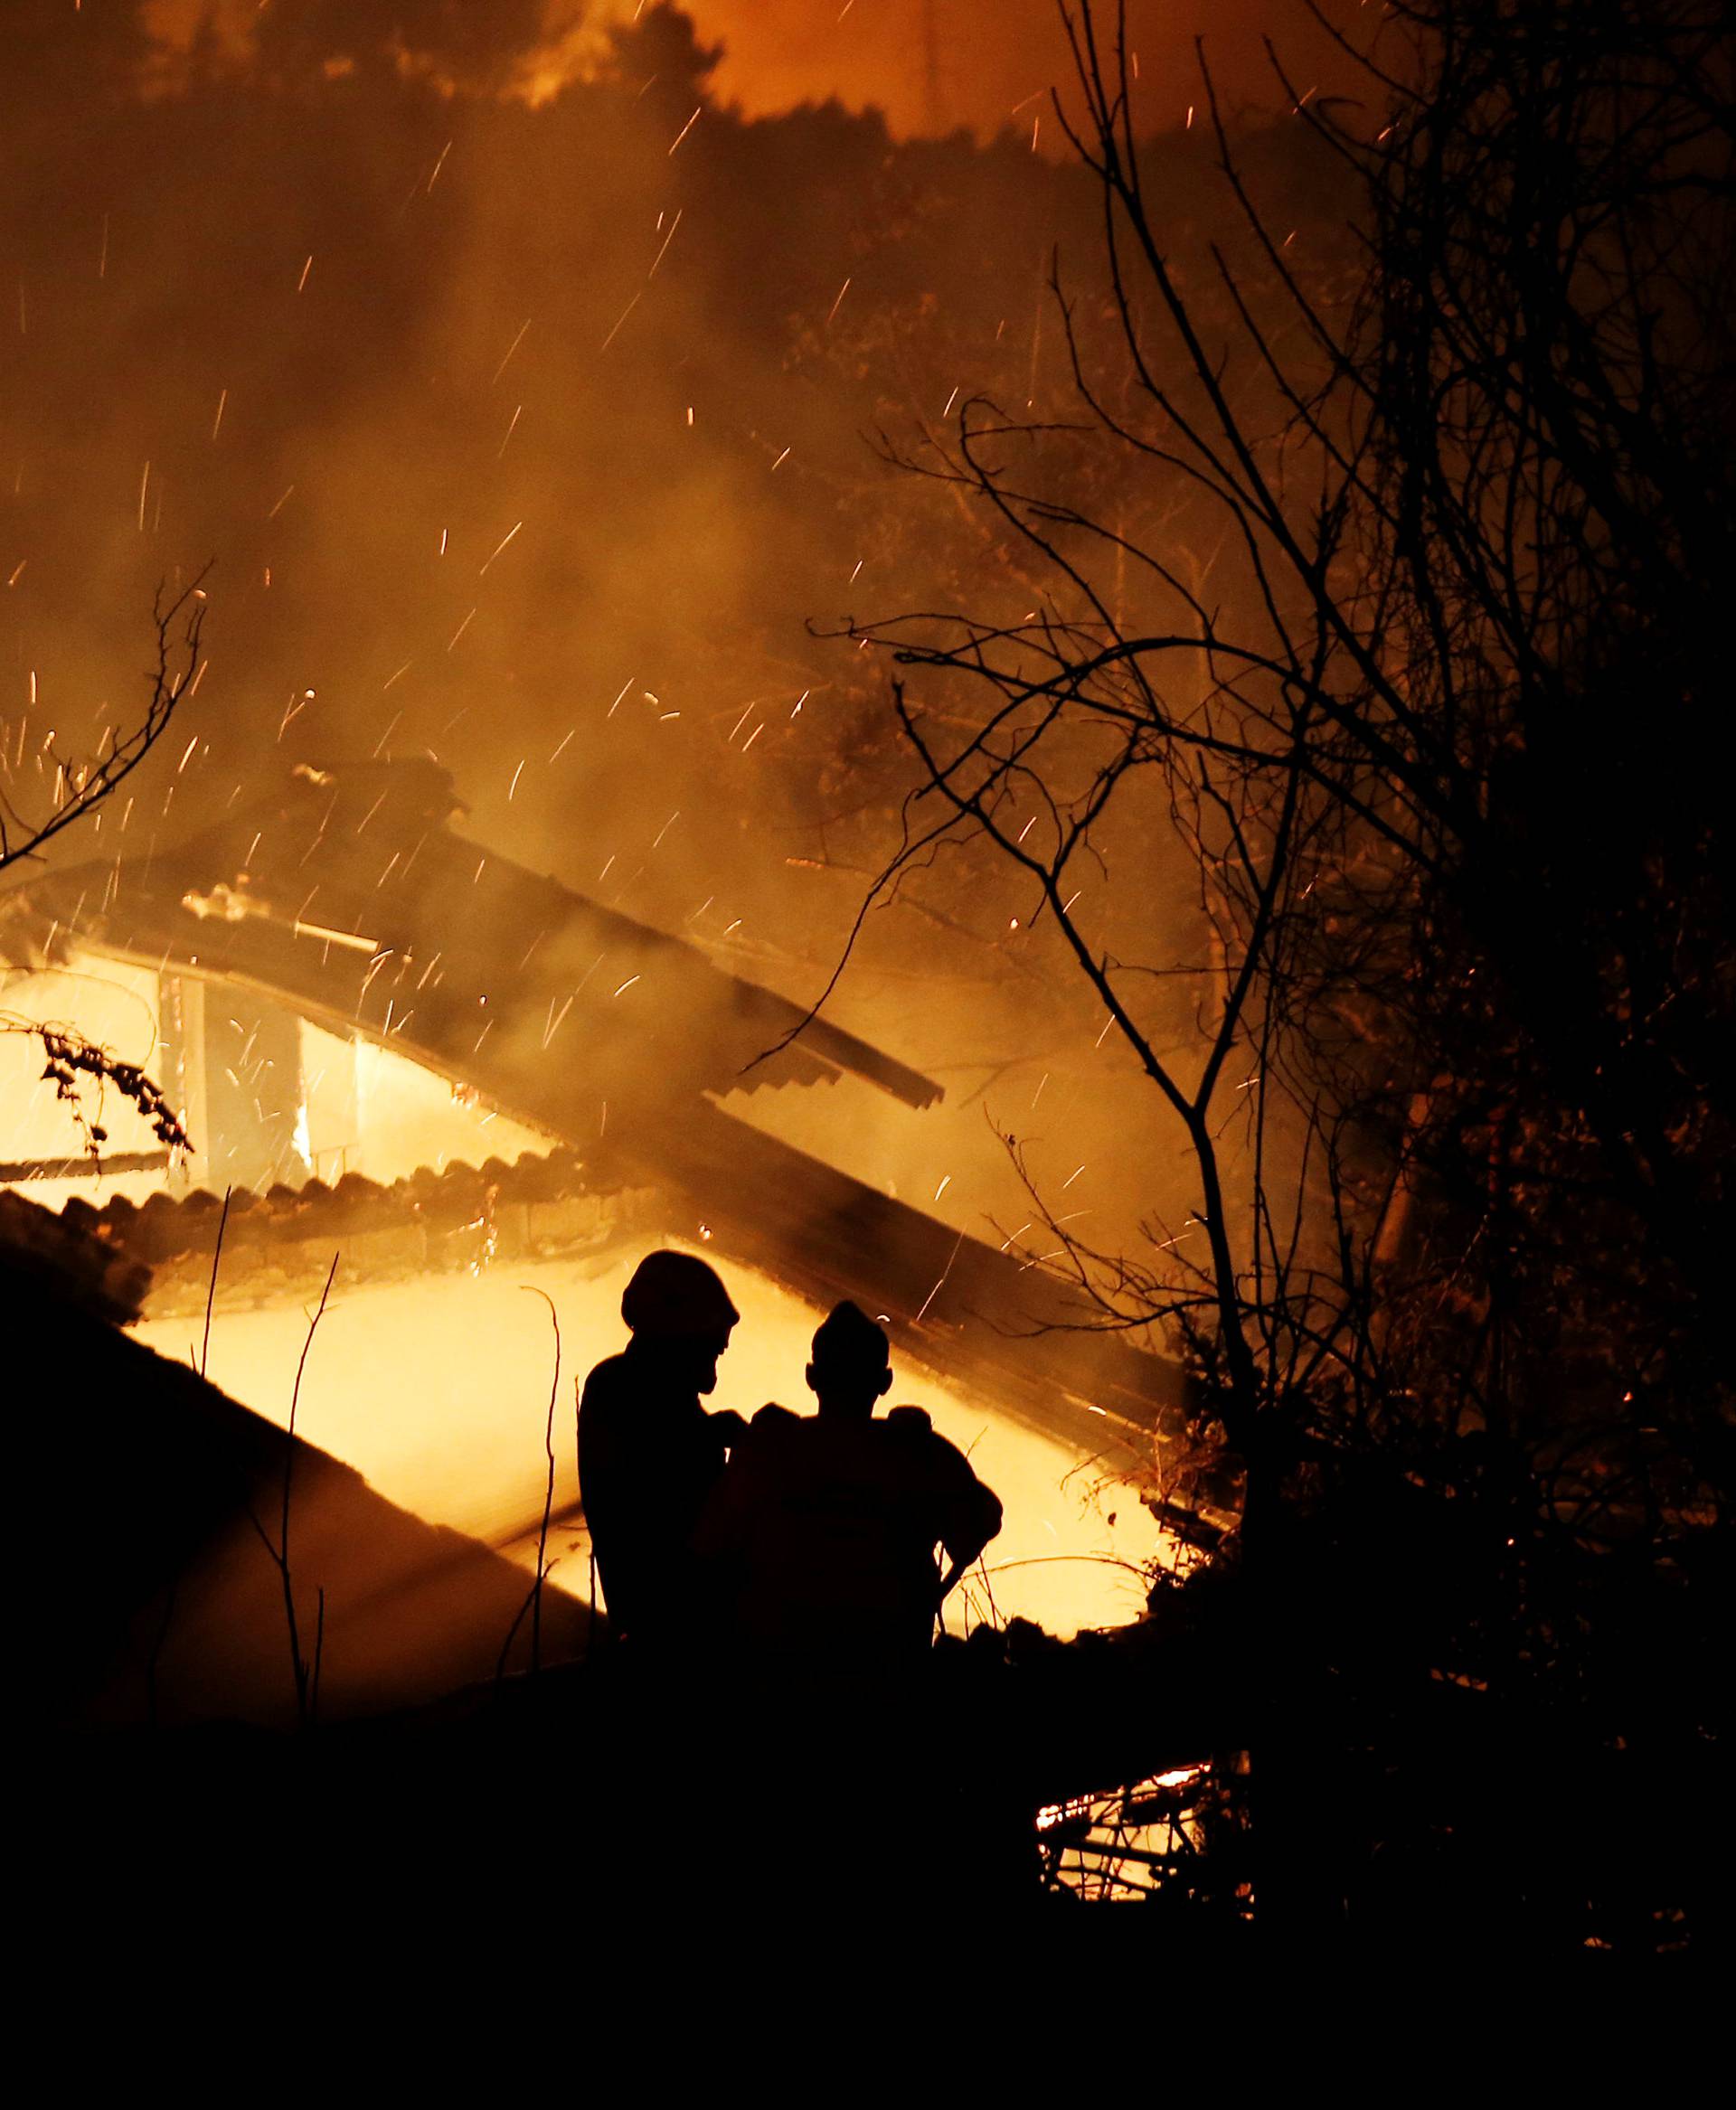 Firefighters try to extinguish a fire in a house as a wildfire burns near the village of Kalamos